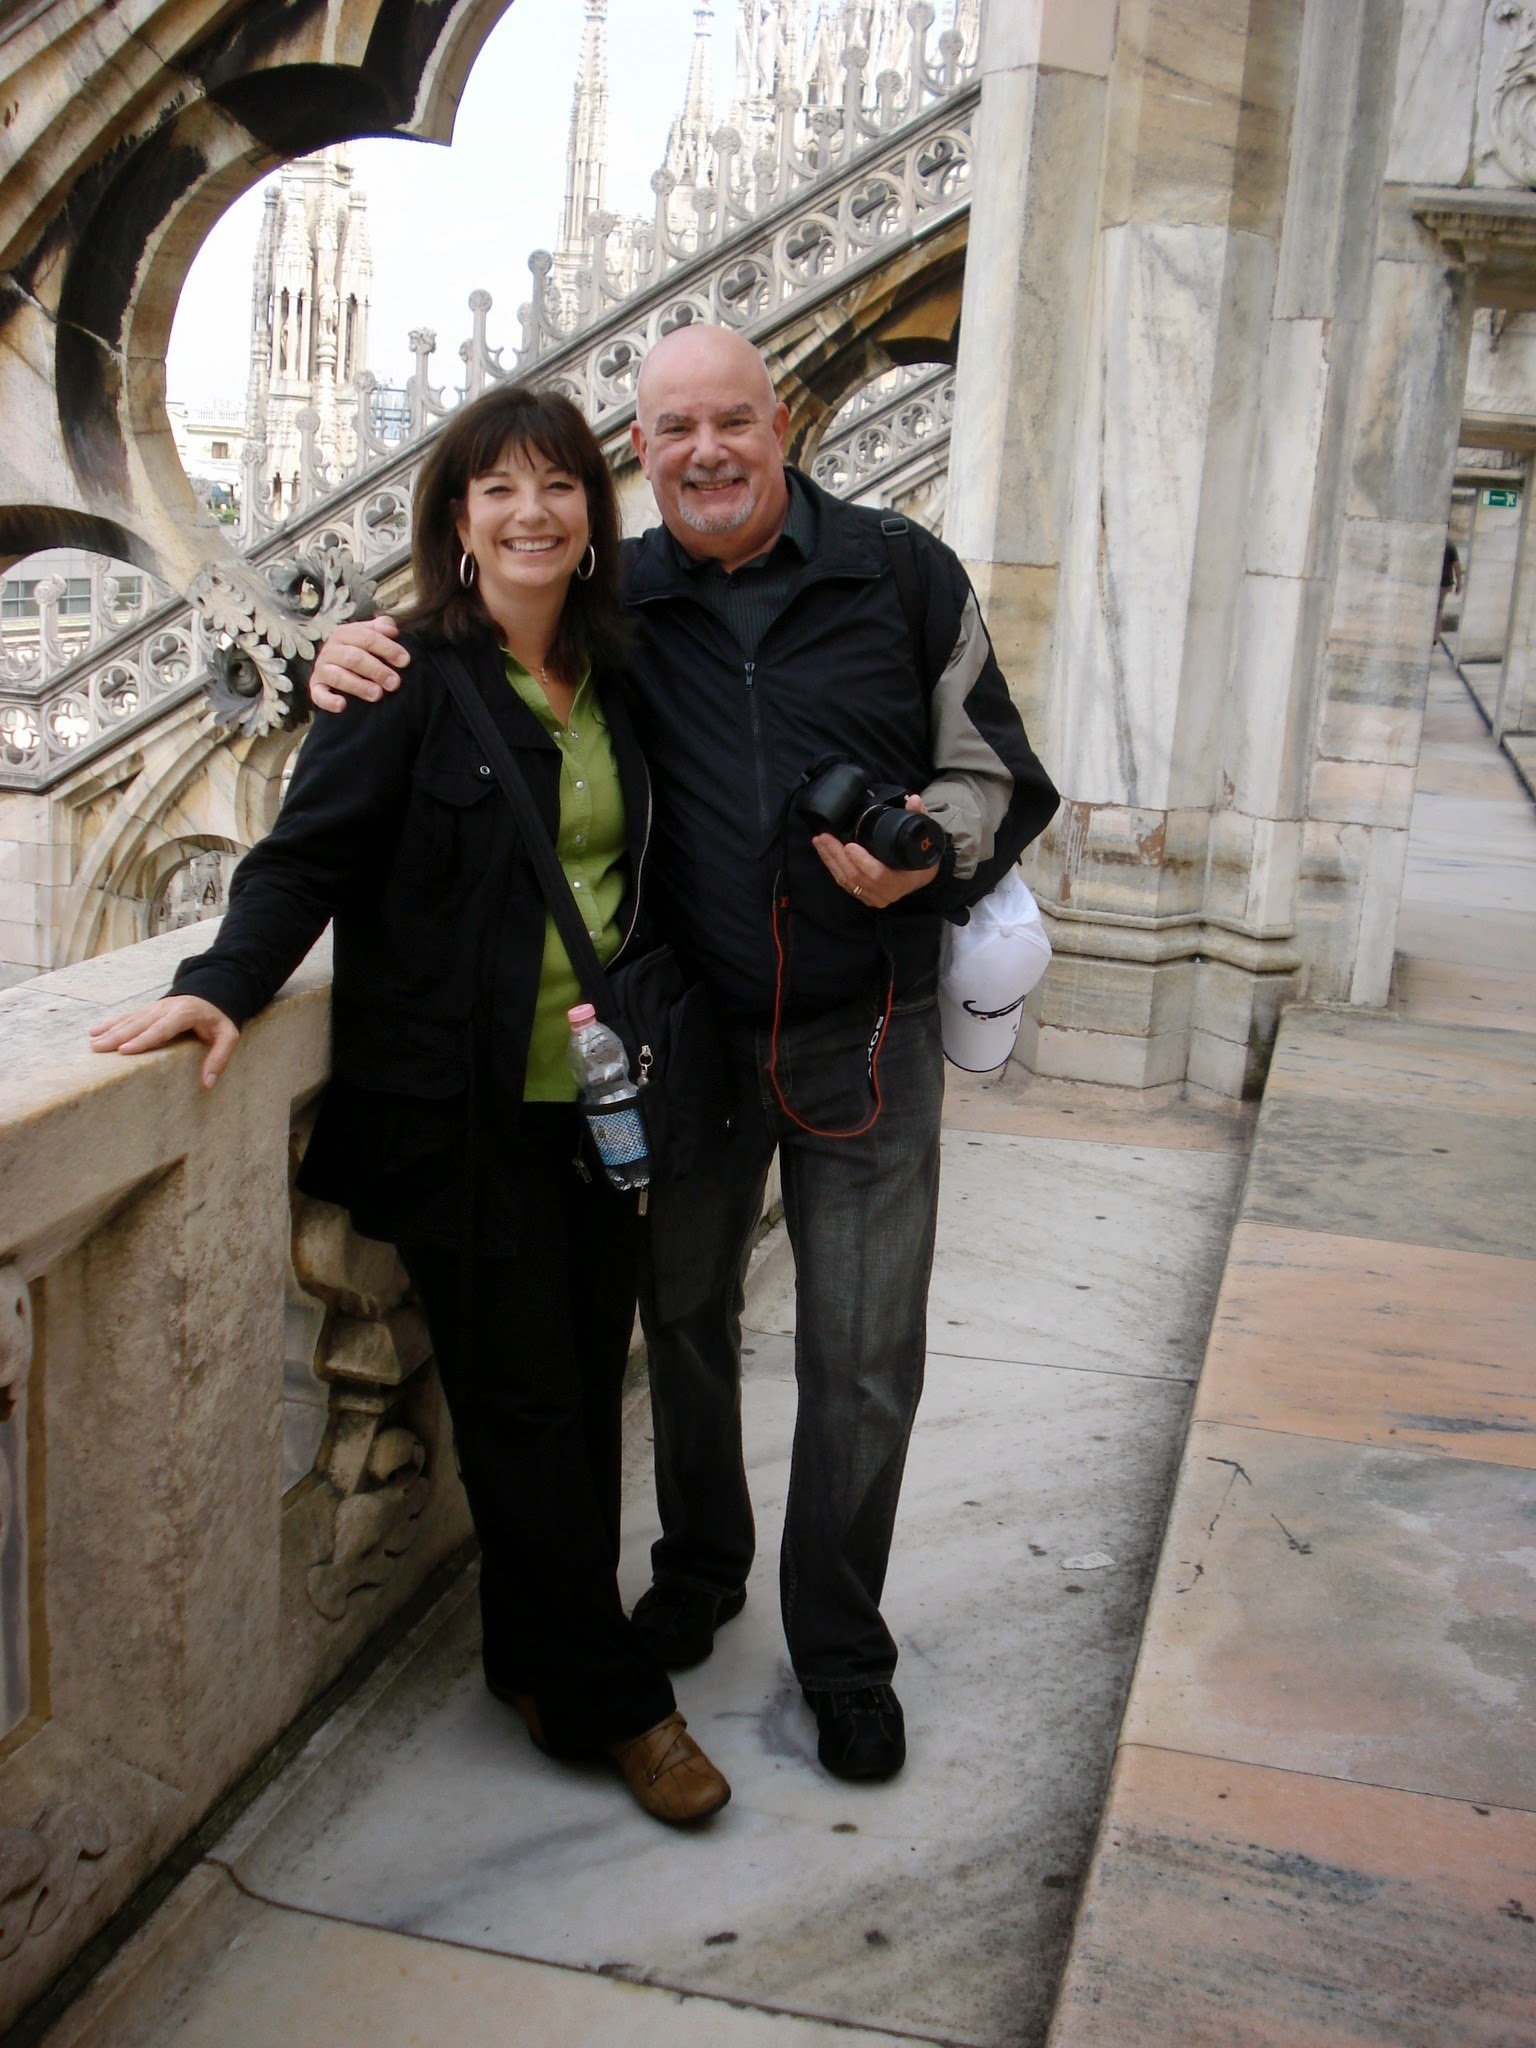 Ilene and Gary on the roof of the duomo in Milan, Italy during our 2010 adventure. ouritalianjourney.com